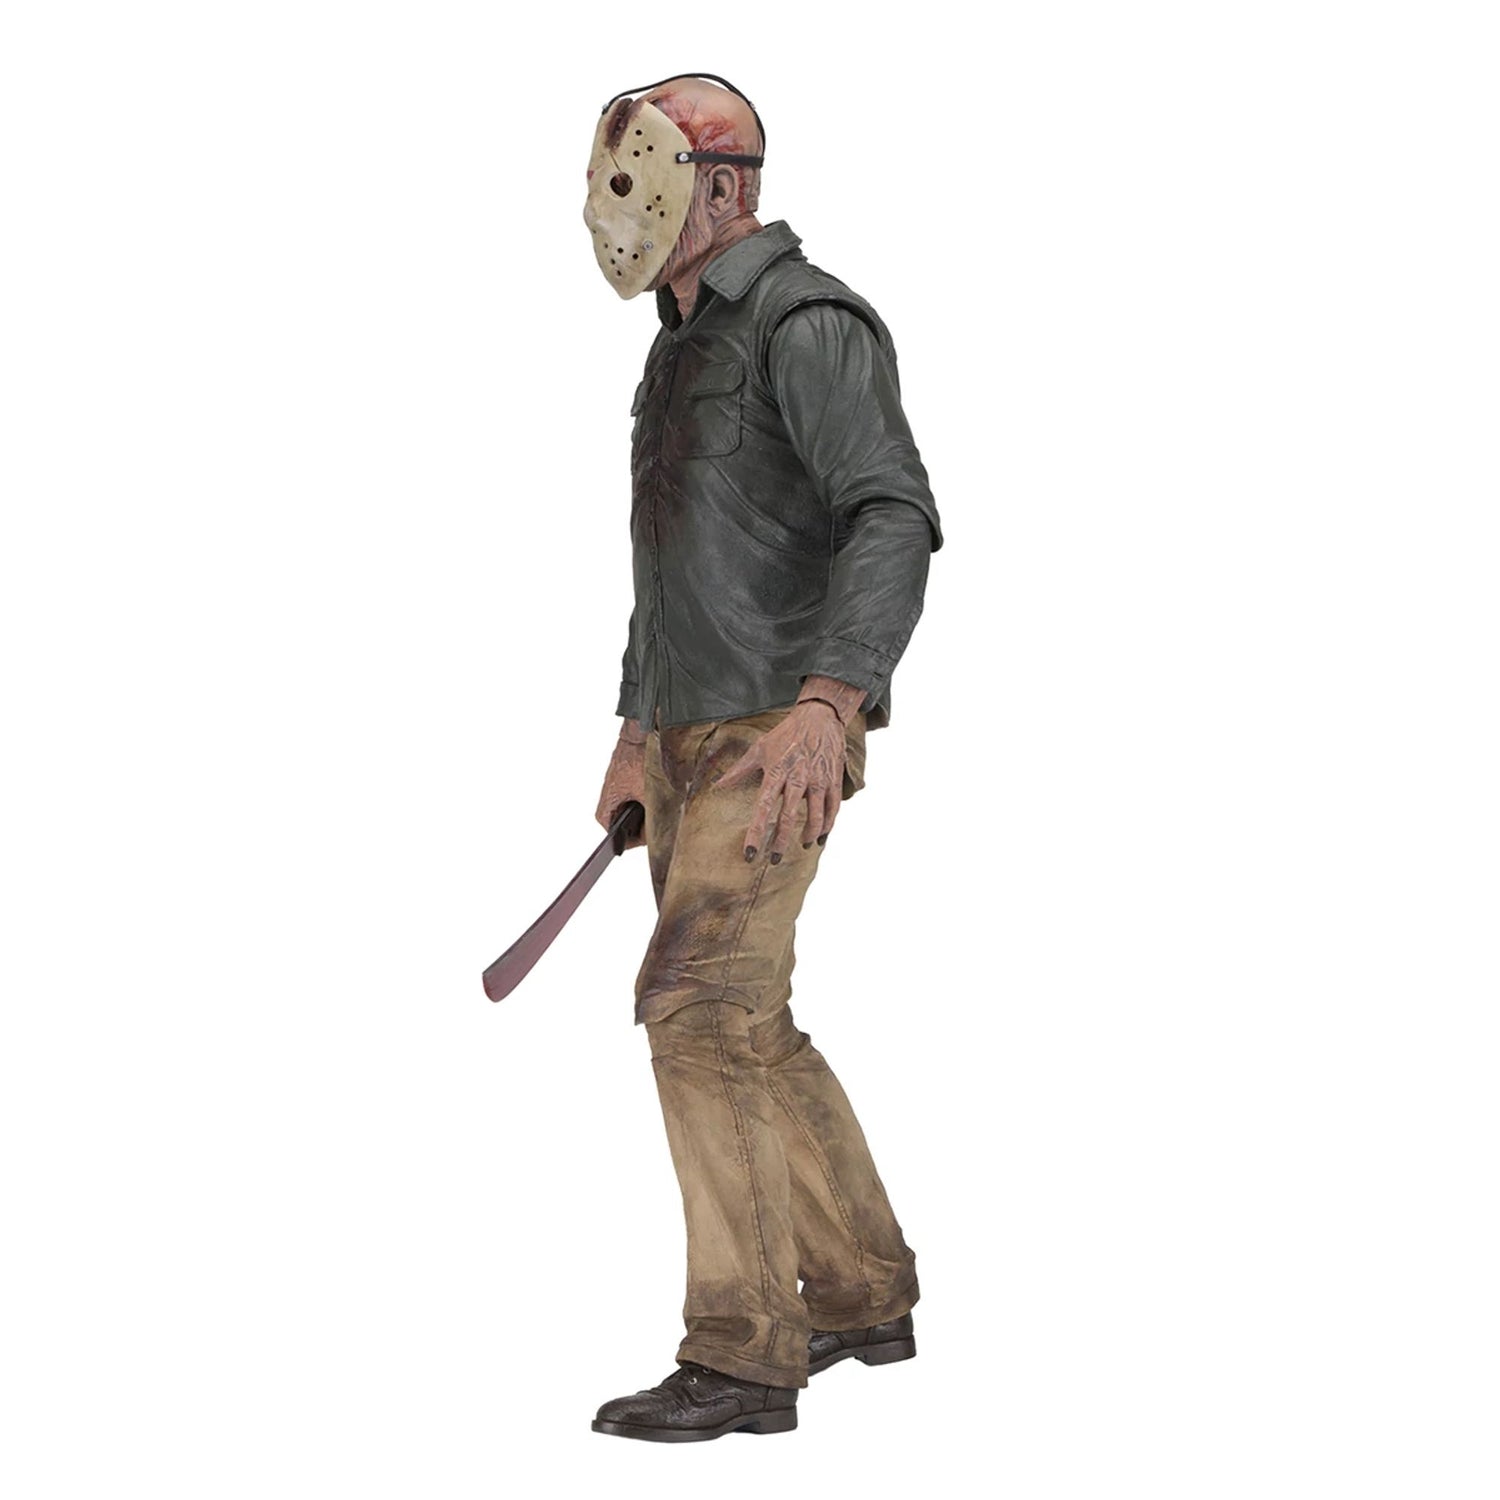 FRIDAY THE 13TH - 1/4 SCALE ACTION FIGURE - PART 4 JASON